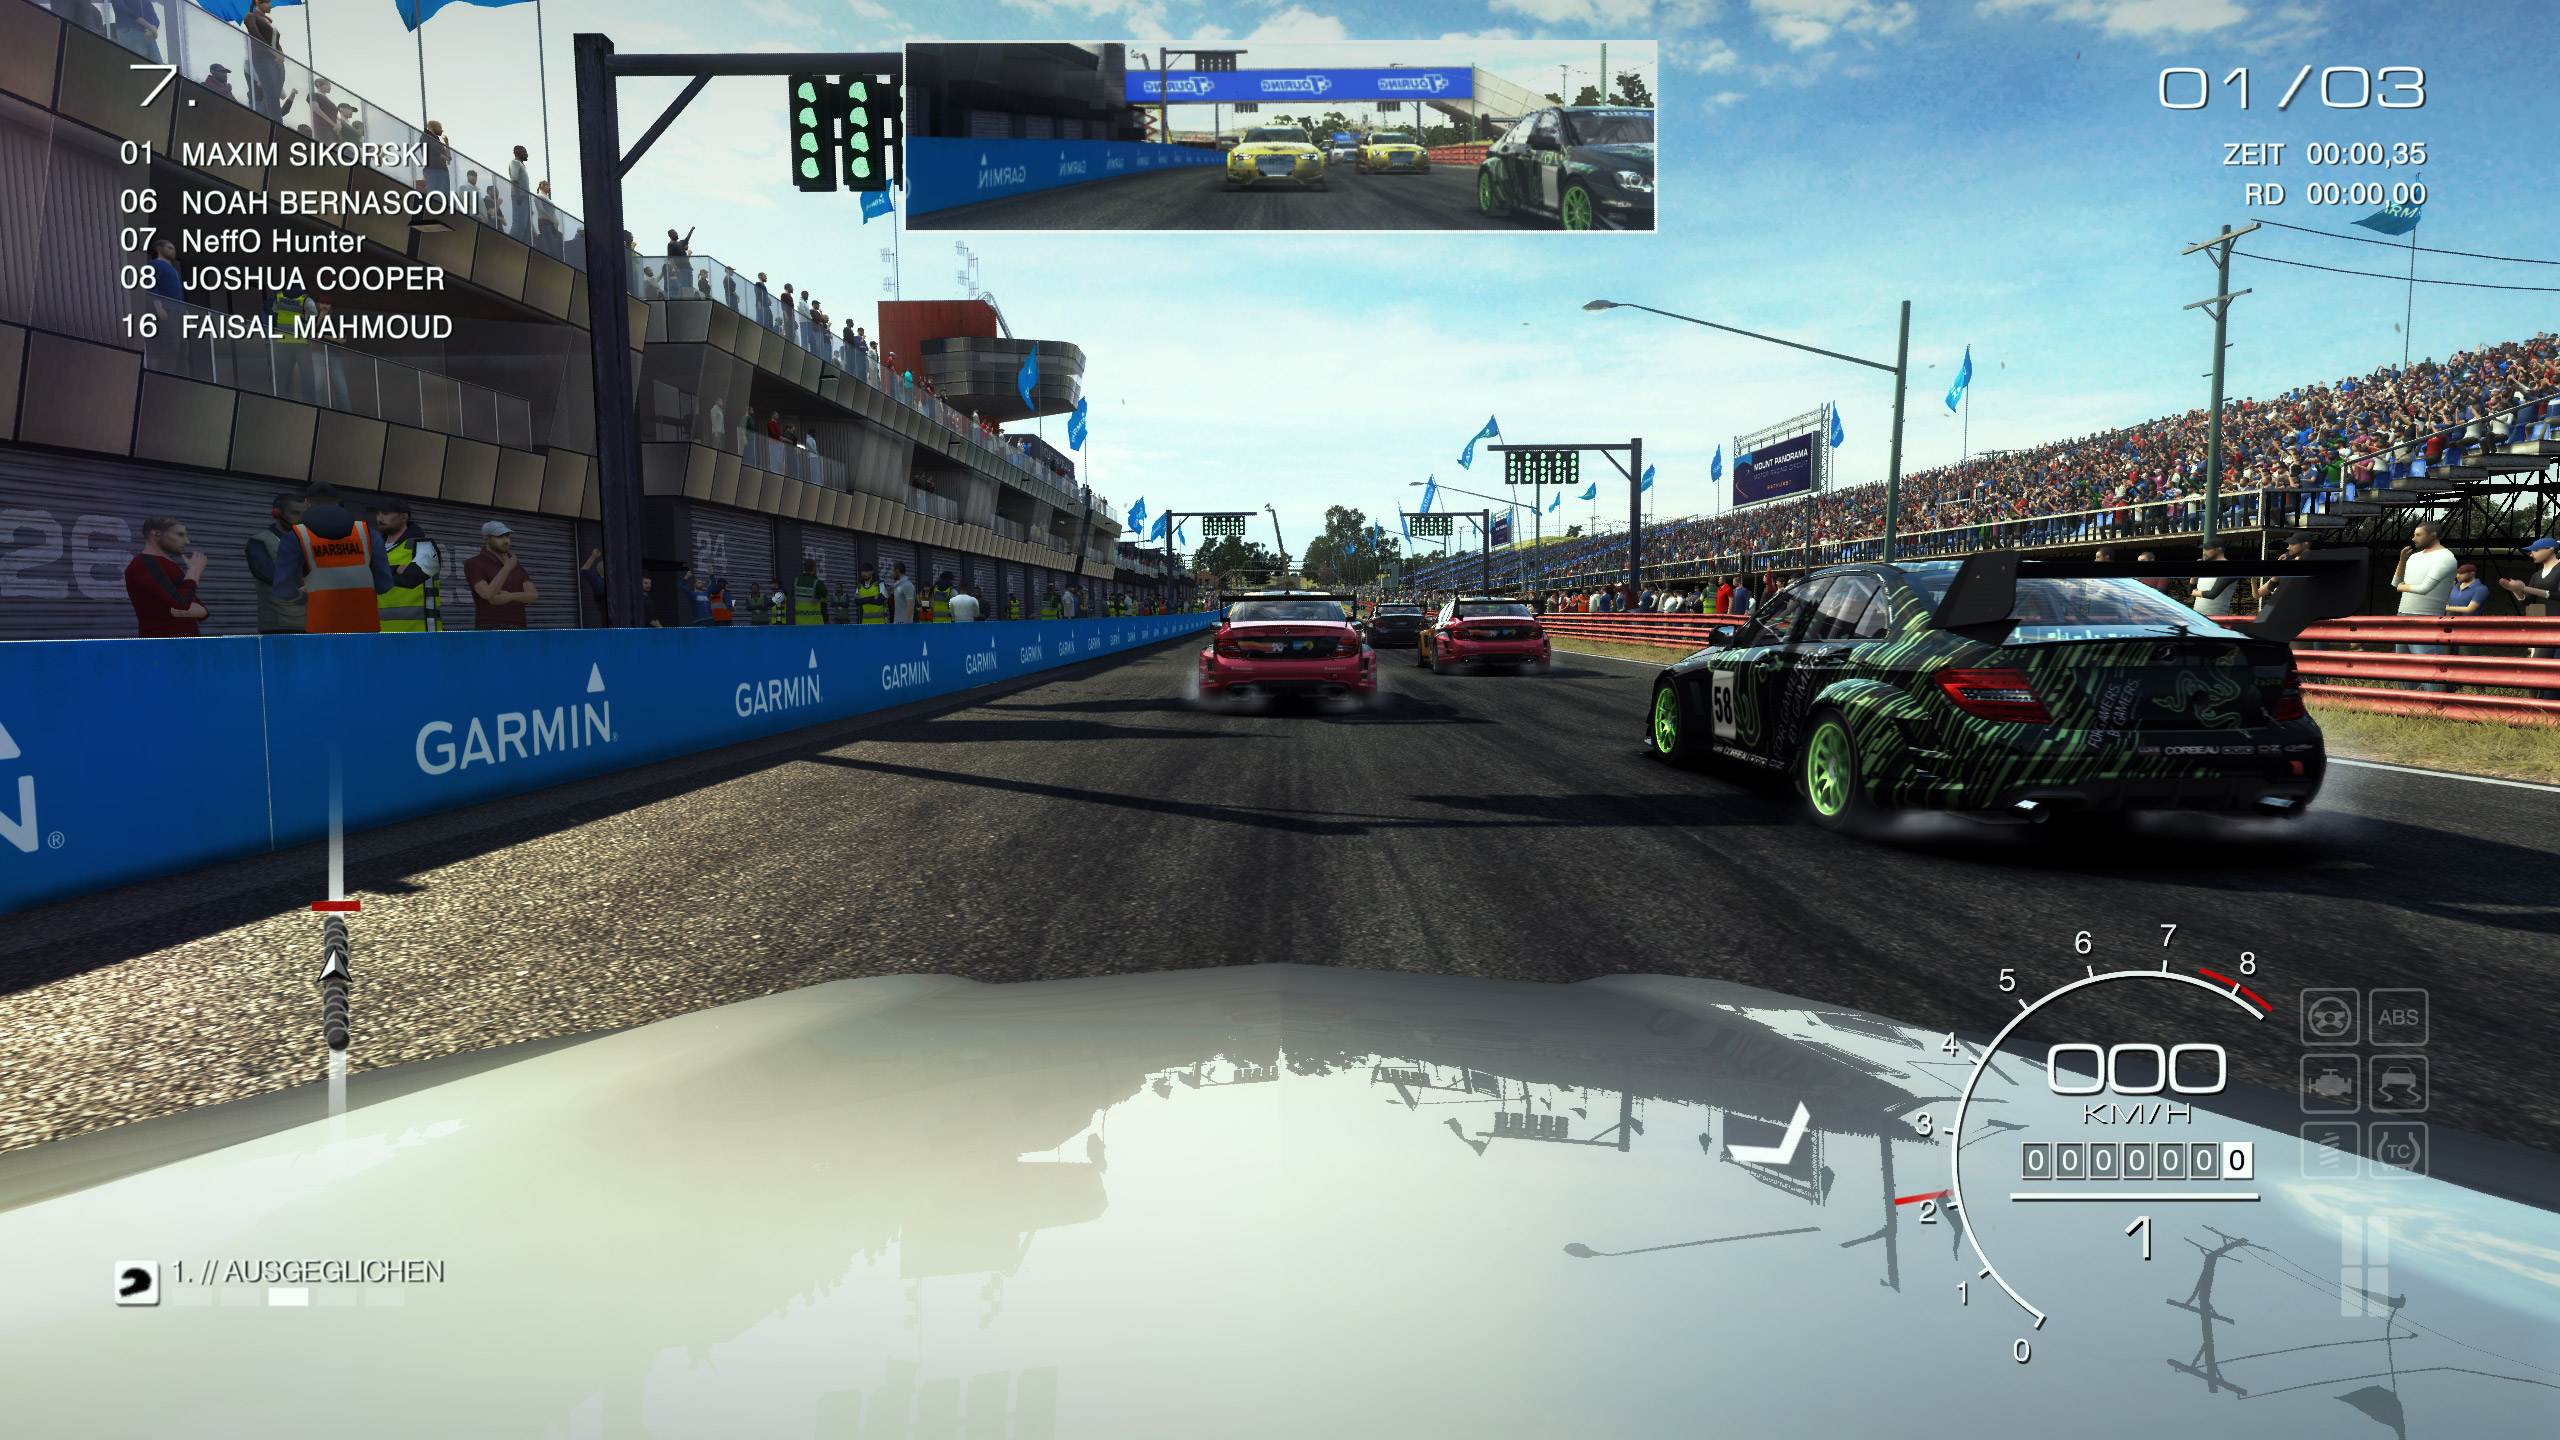 Andropalace - GRID AUTOSPORT has Finally Arrived on